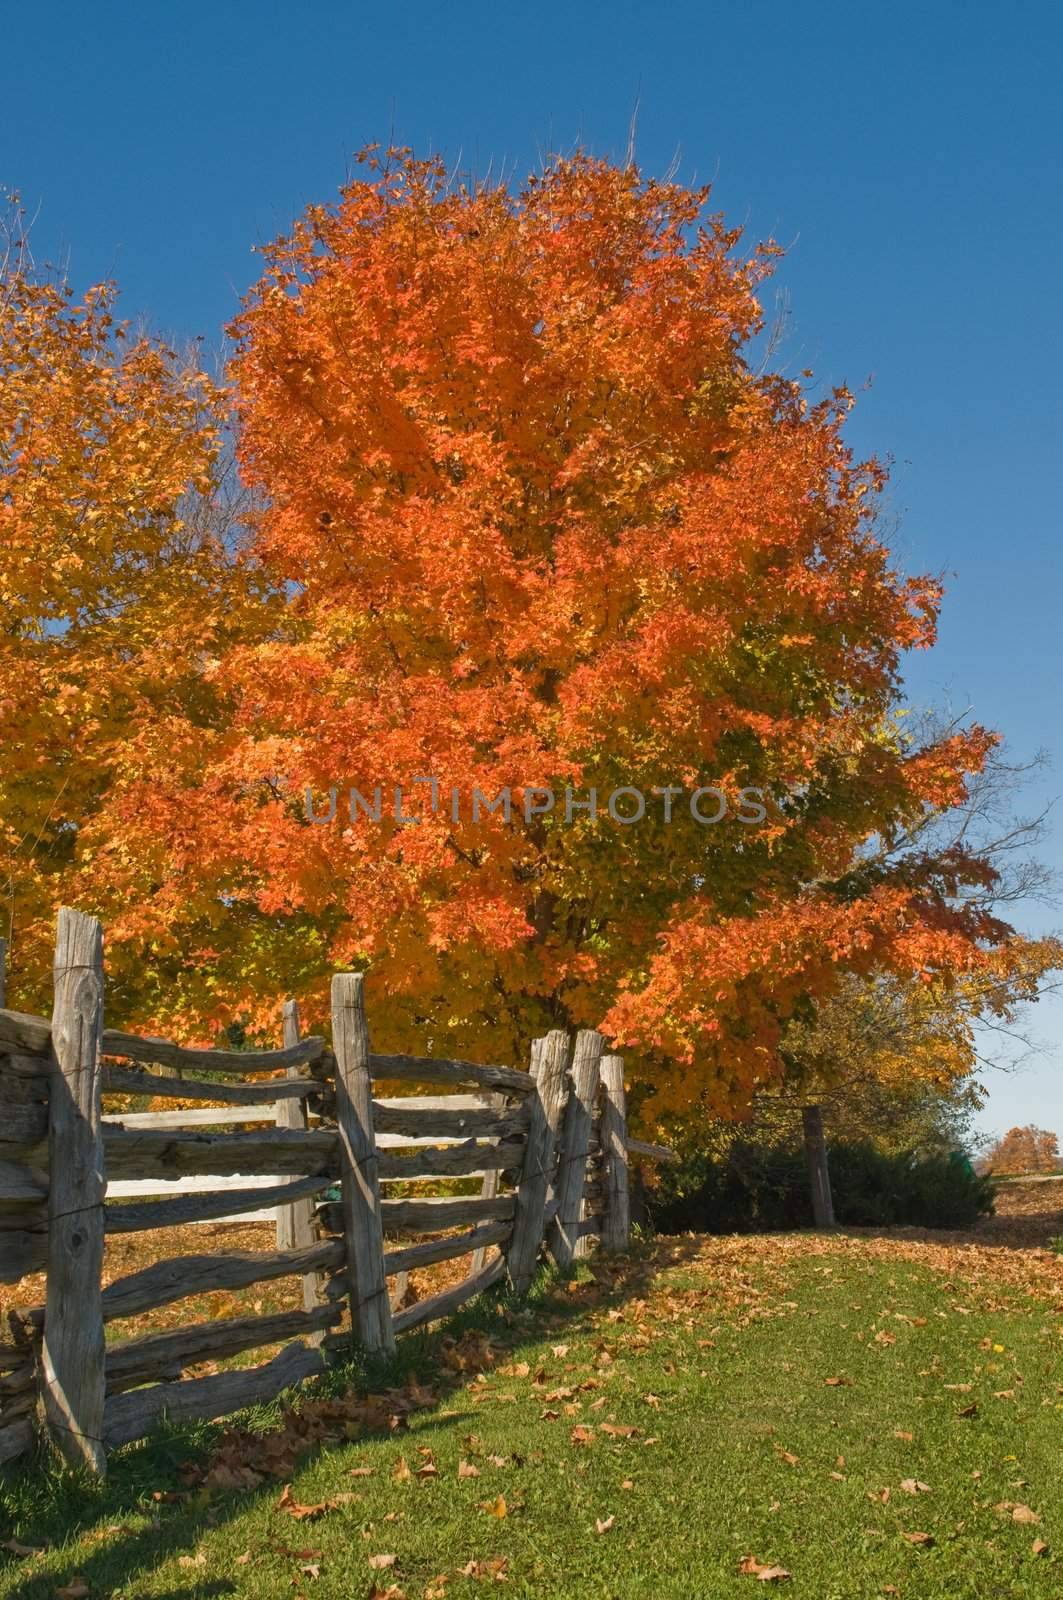 Rural Autumn by billberryphotography